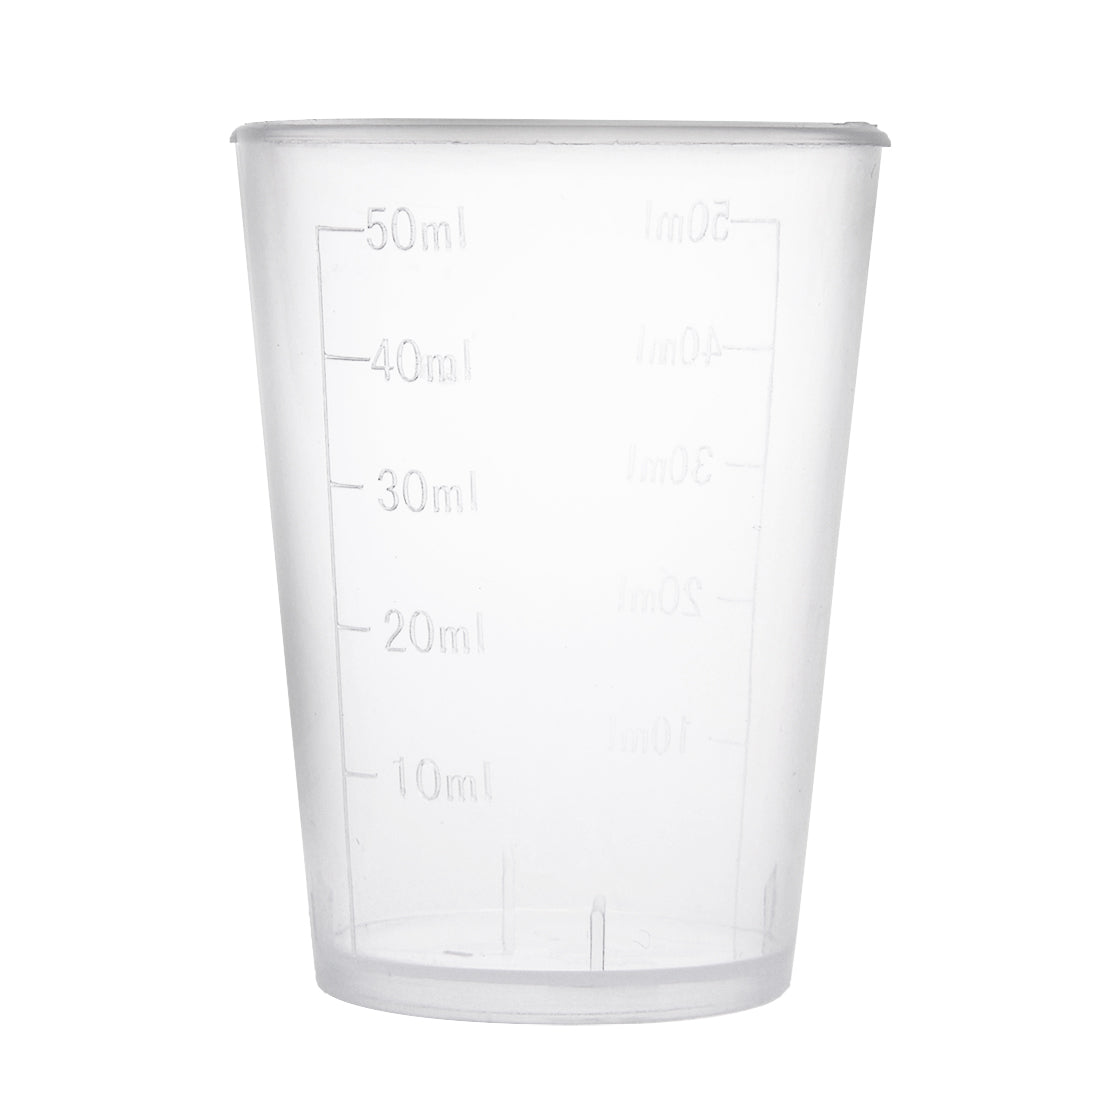 uxcell Uxcell Kitchen Laboratory 50mL Plastic Measuring Cup 20pcs w Cap